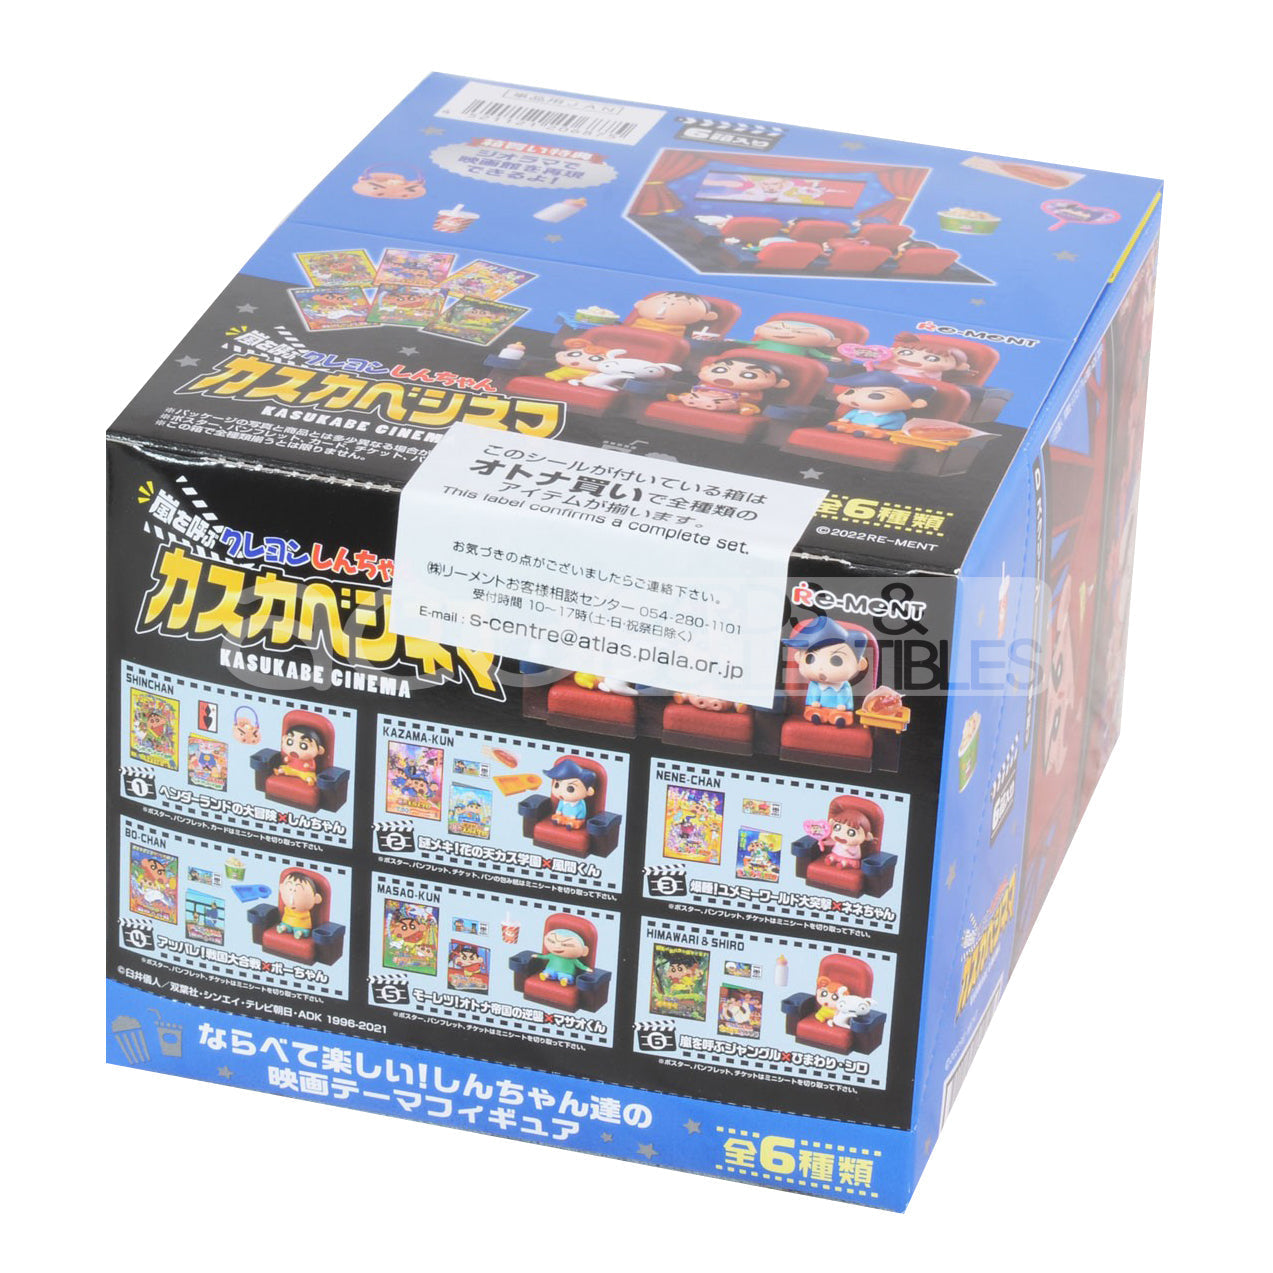 Re-Ment Crayon ShinChan Theater-Single Box (Random)-Re-Ment-Ace Cards & Collectibles